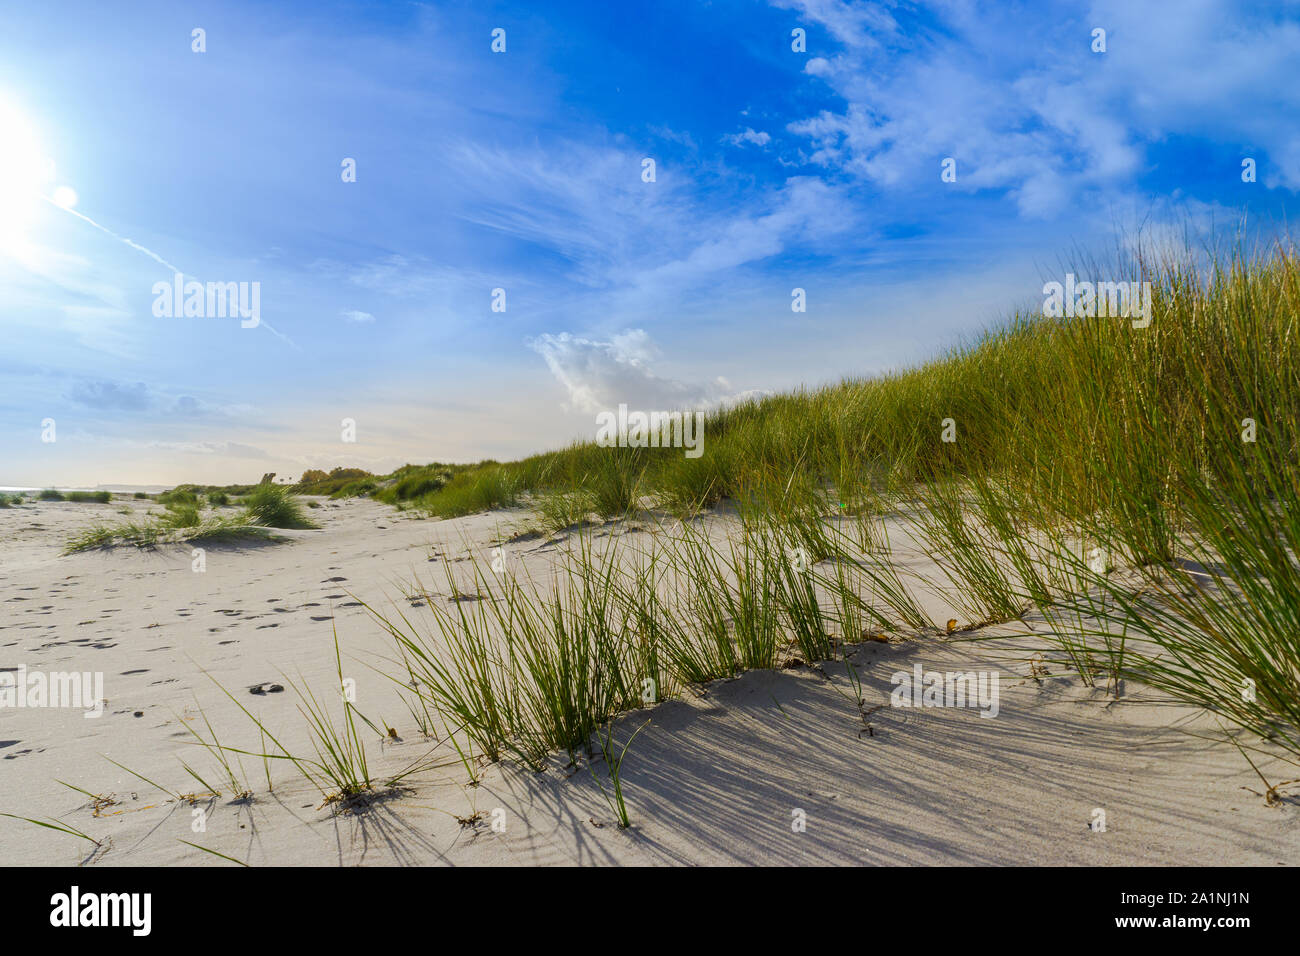 Dunes covered with dune grass on the beach Stock Photo